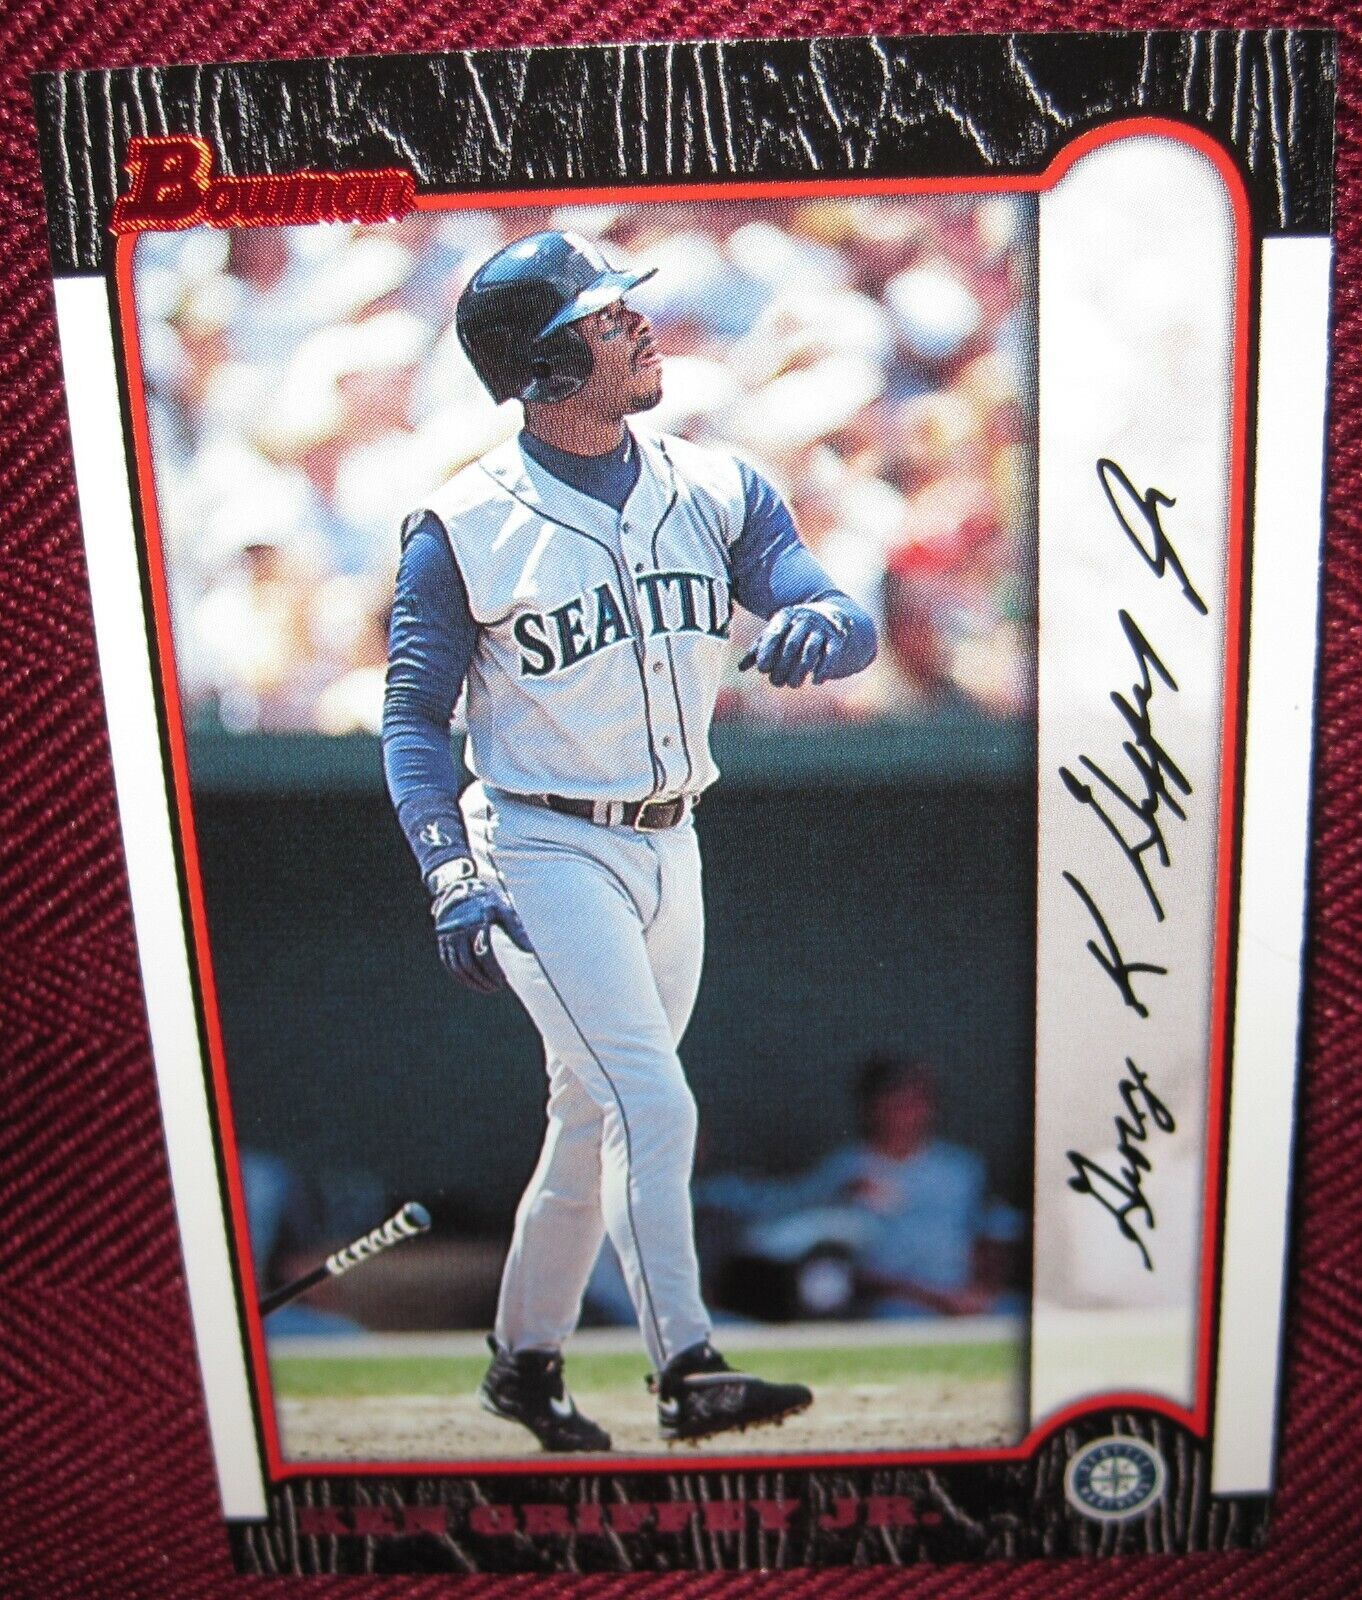 Primary image for 1999 BOWMAN #52 KEN GRIFFEY JR. SEATTLE MARINERS